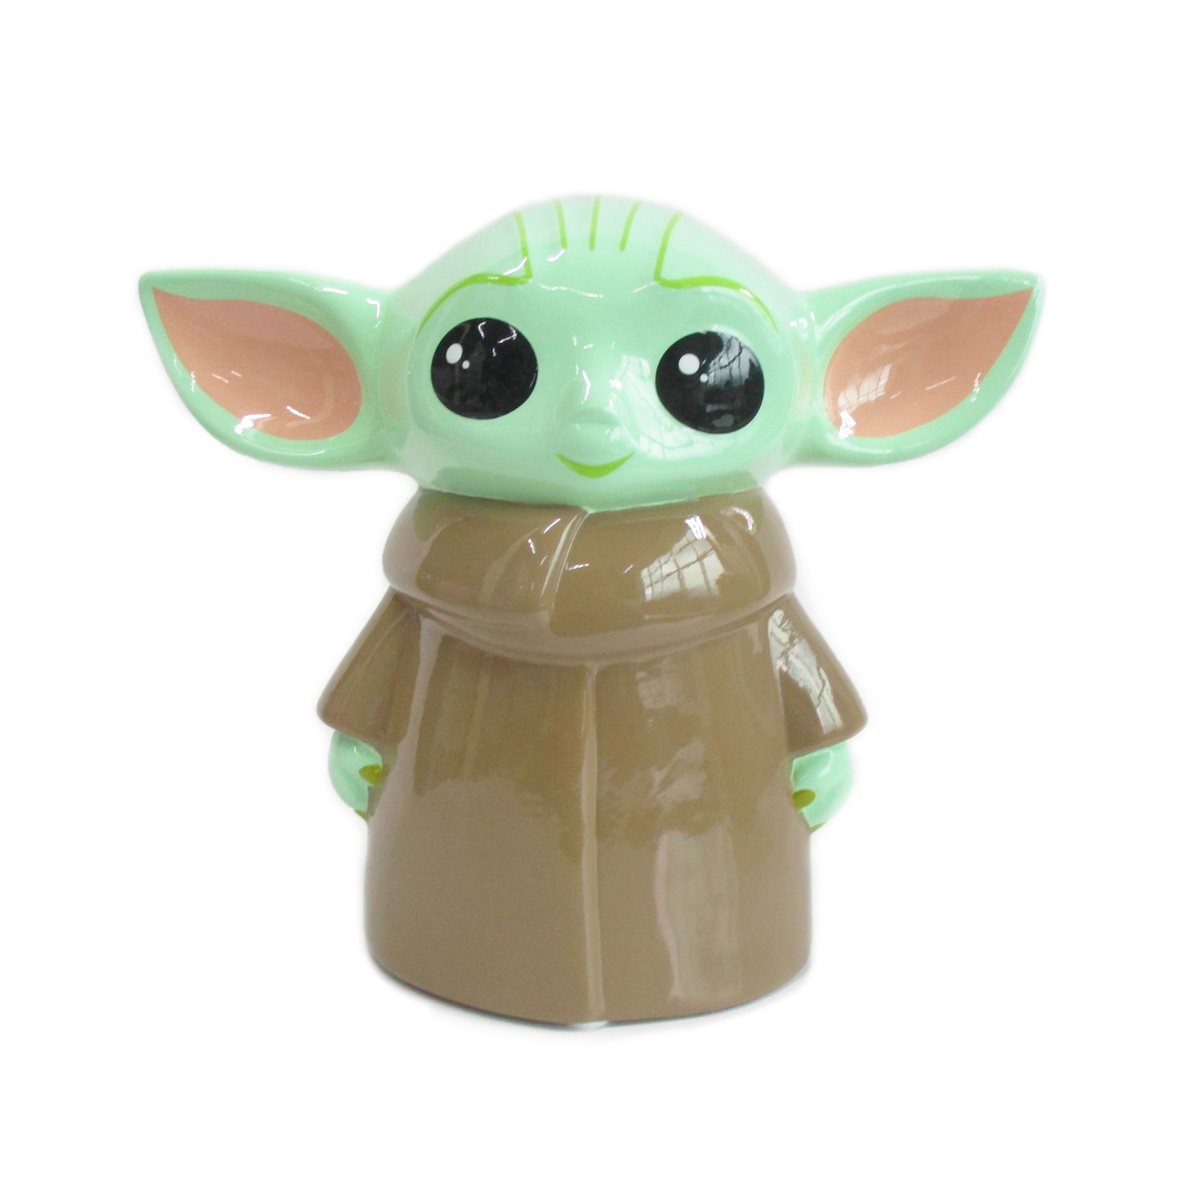 Star Wars Baby Yoda with Cup Coin Bank PVC The Mandalorian by Monogram 